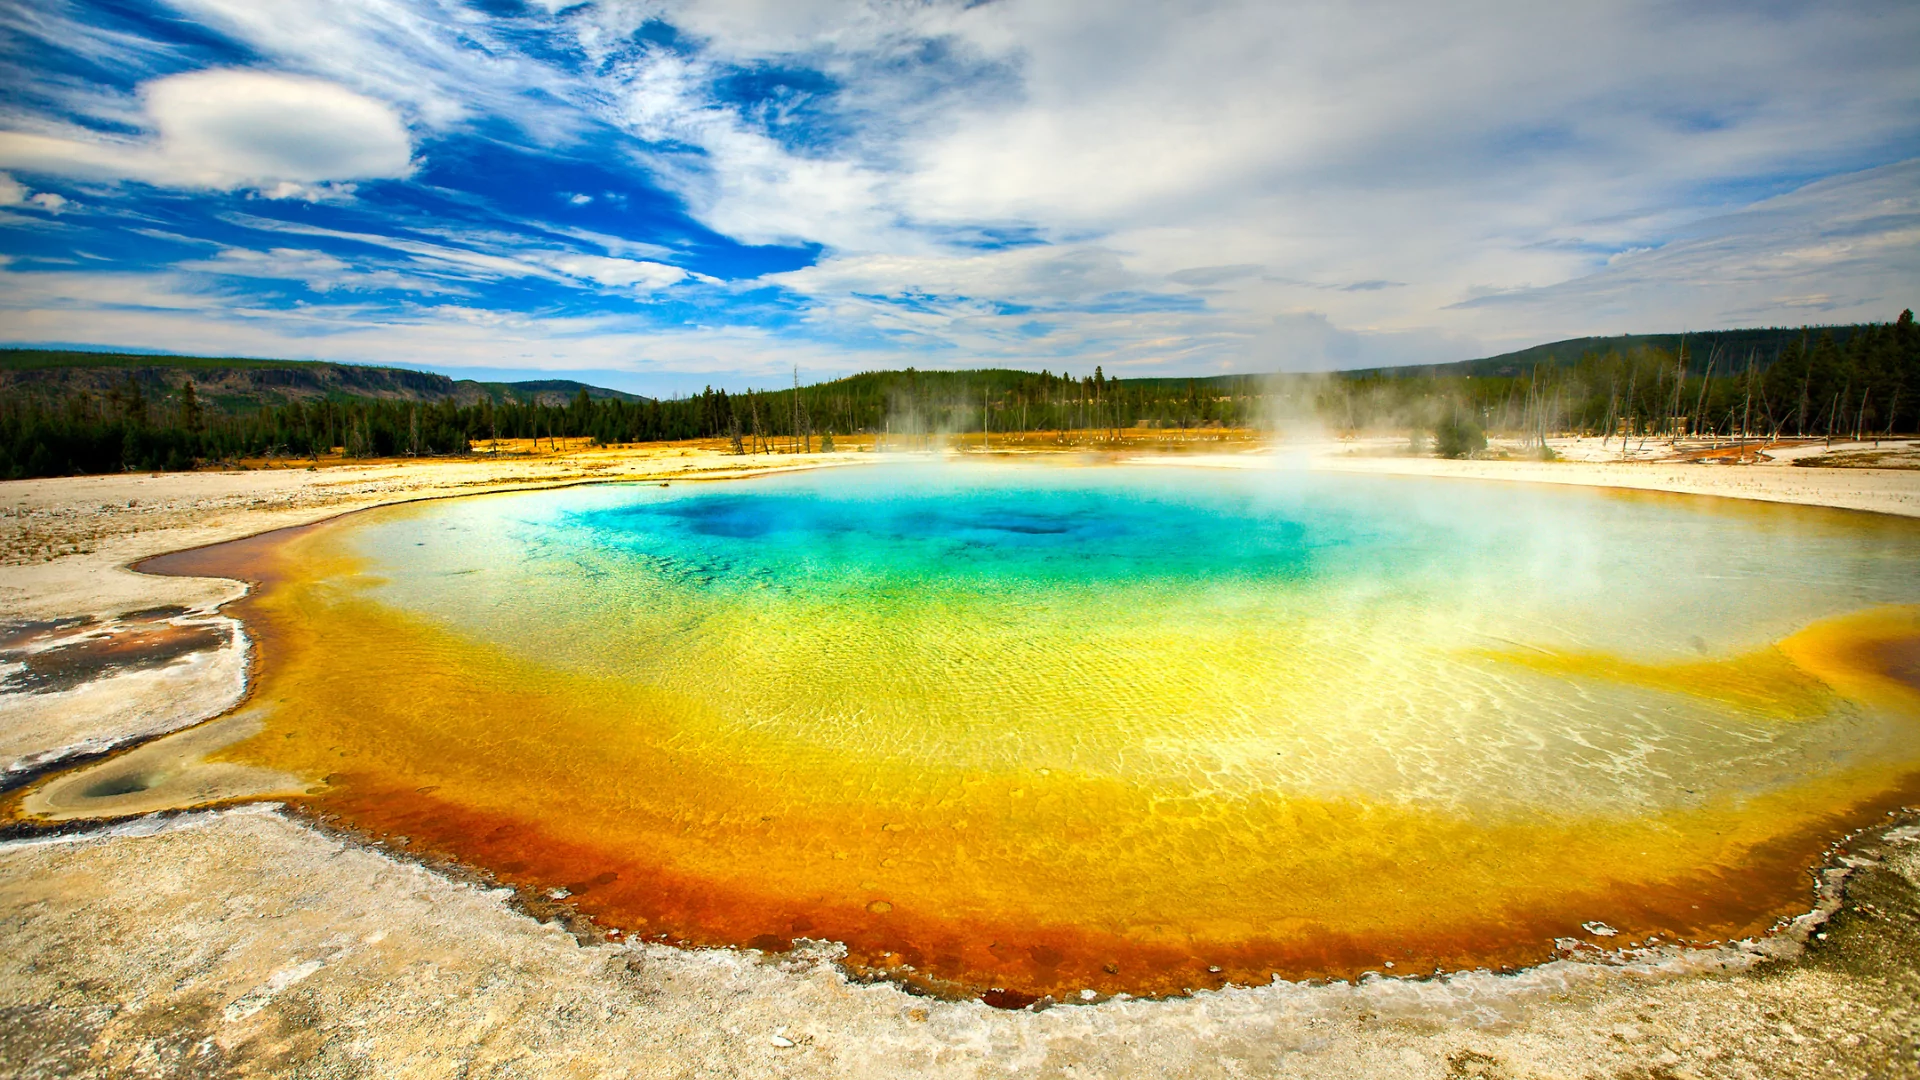 Colorful Yellowstone national park hot springs